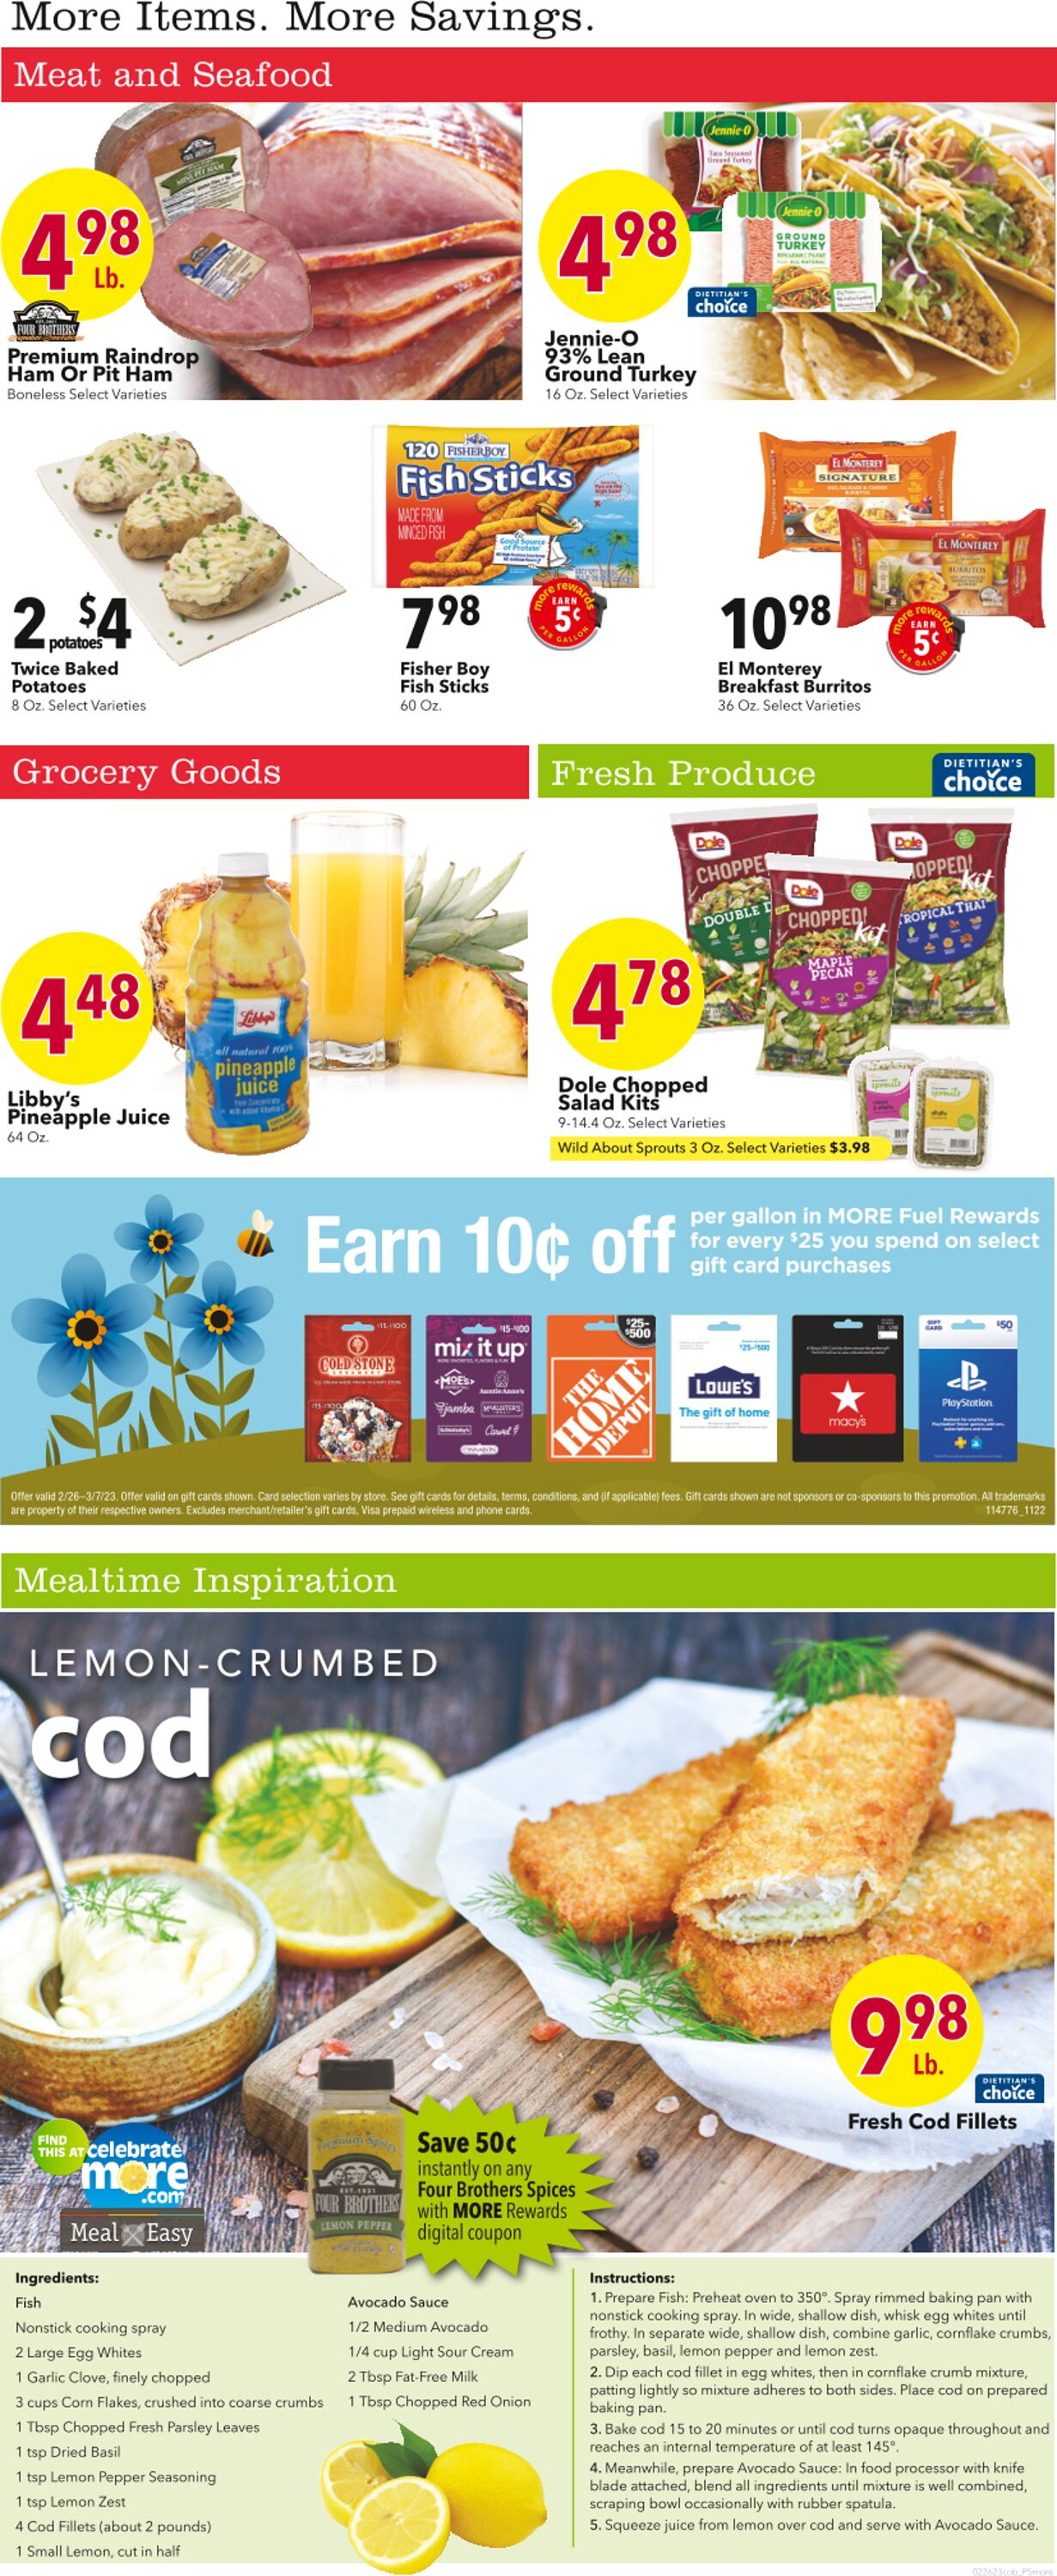 Weekly ad Coborn's 03/01/2023 - 03/07/2023